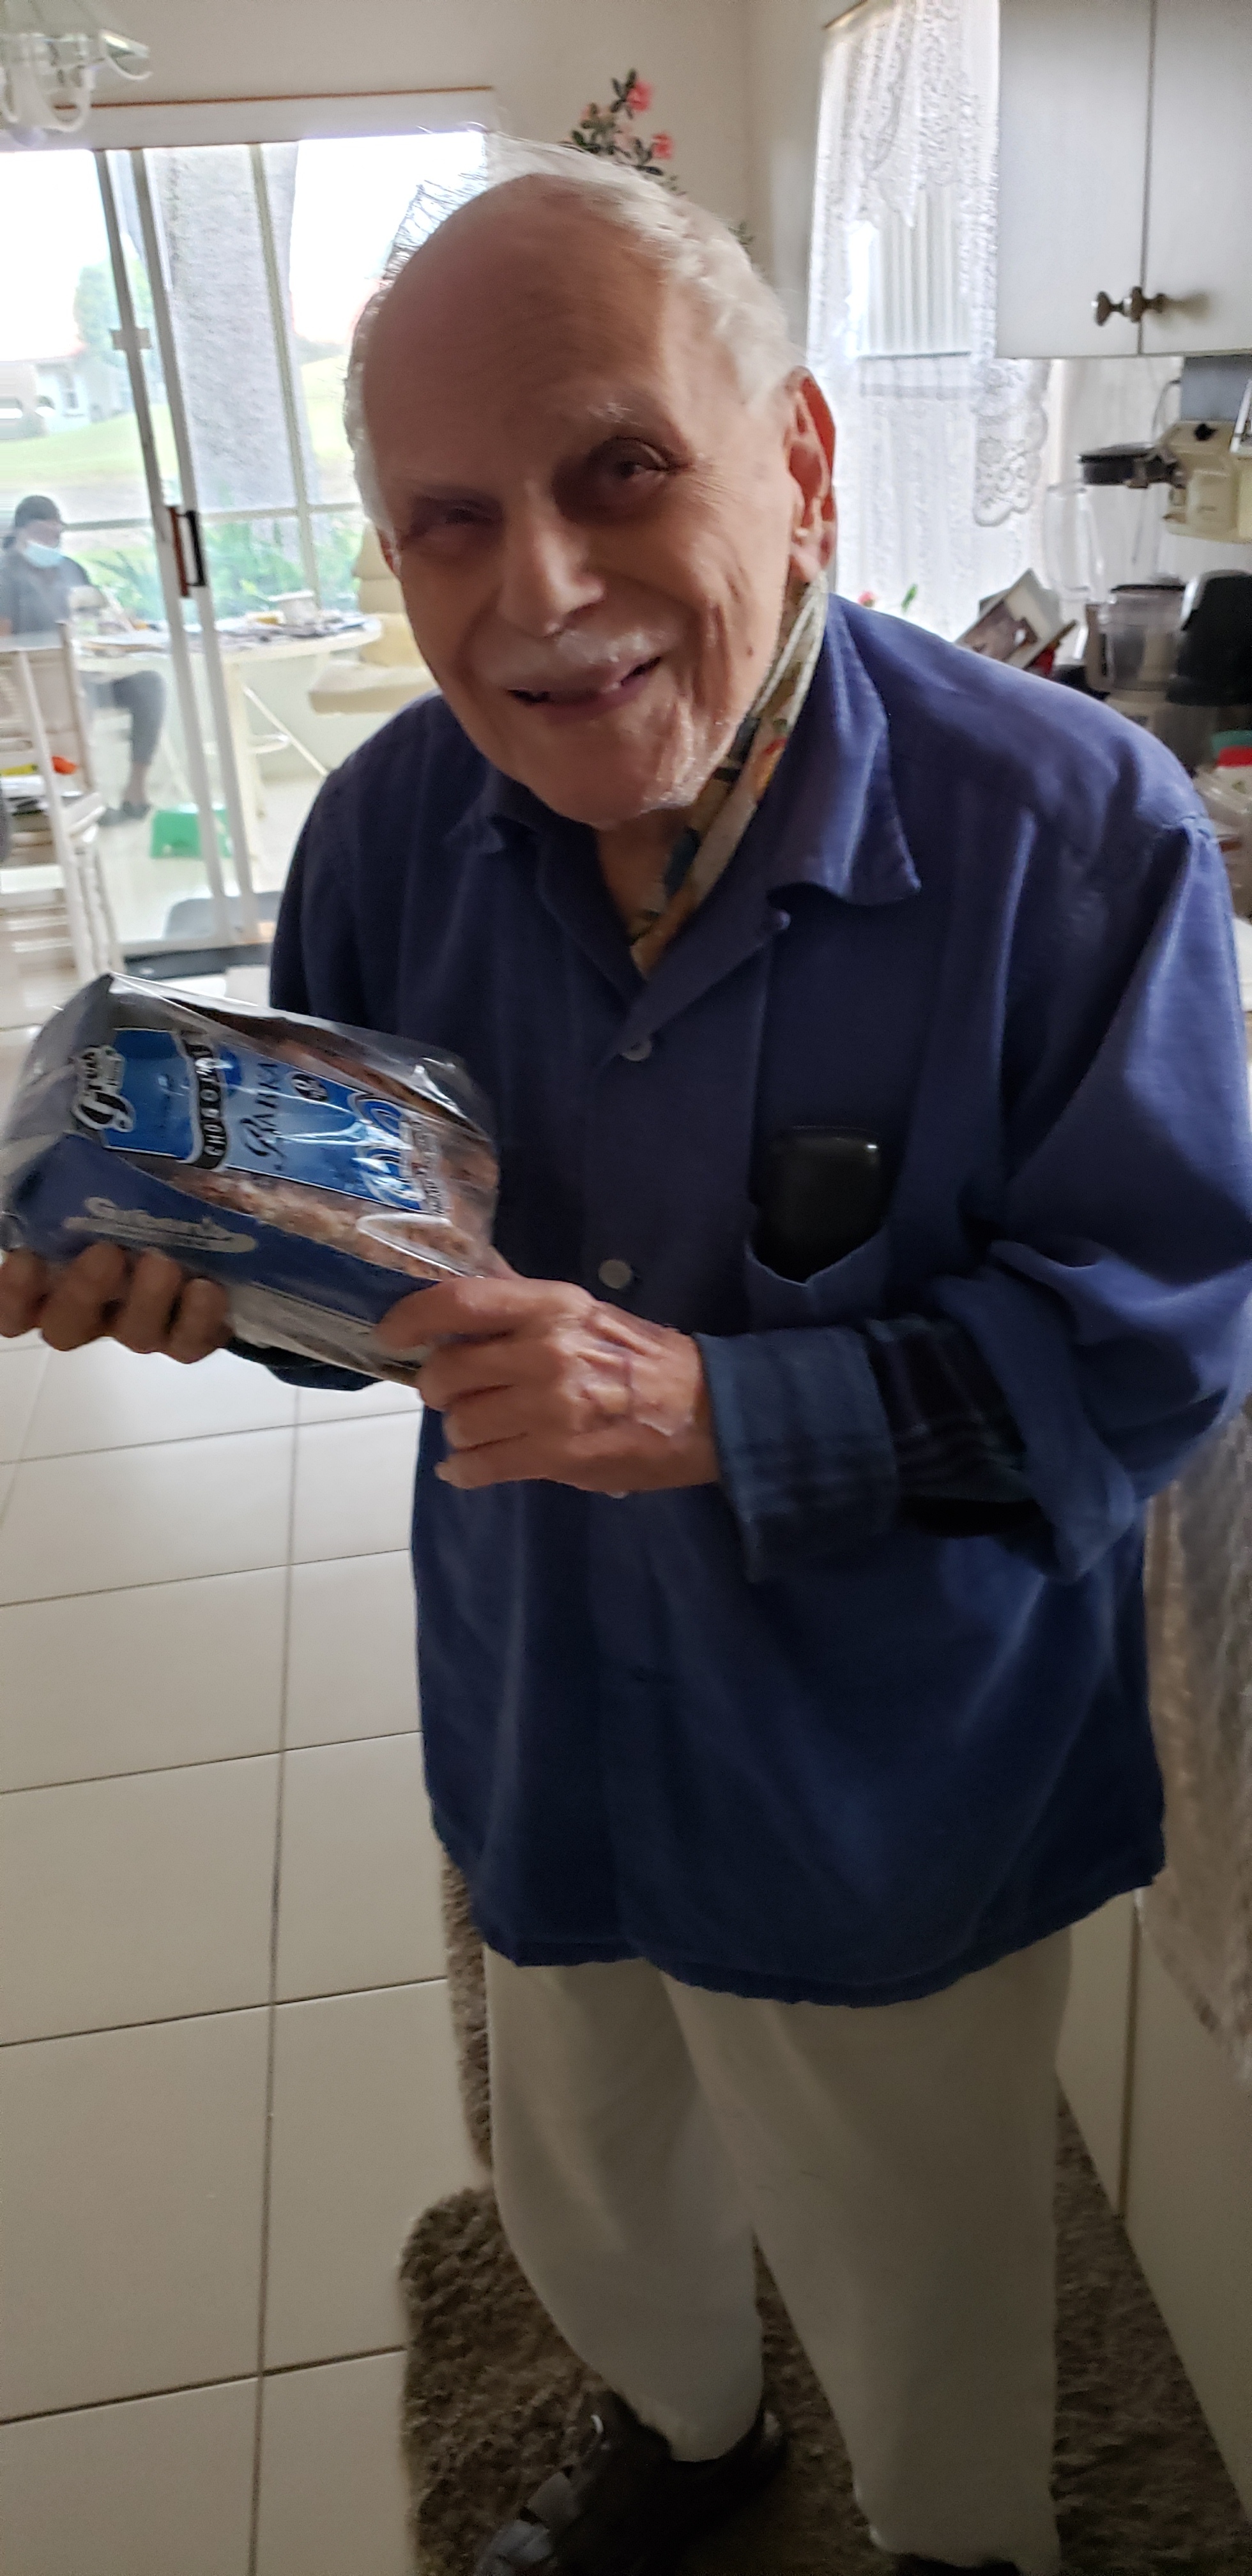 99 year old Veteran receiving our meals